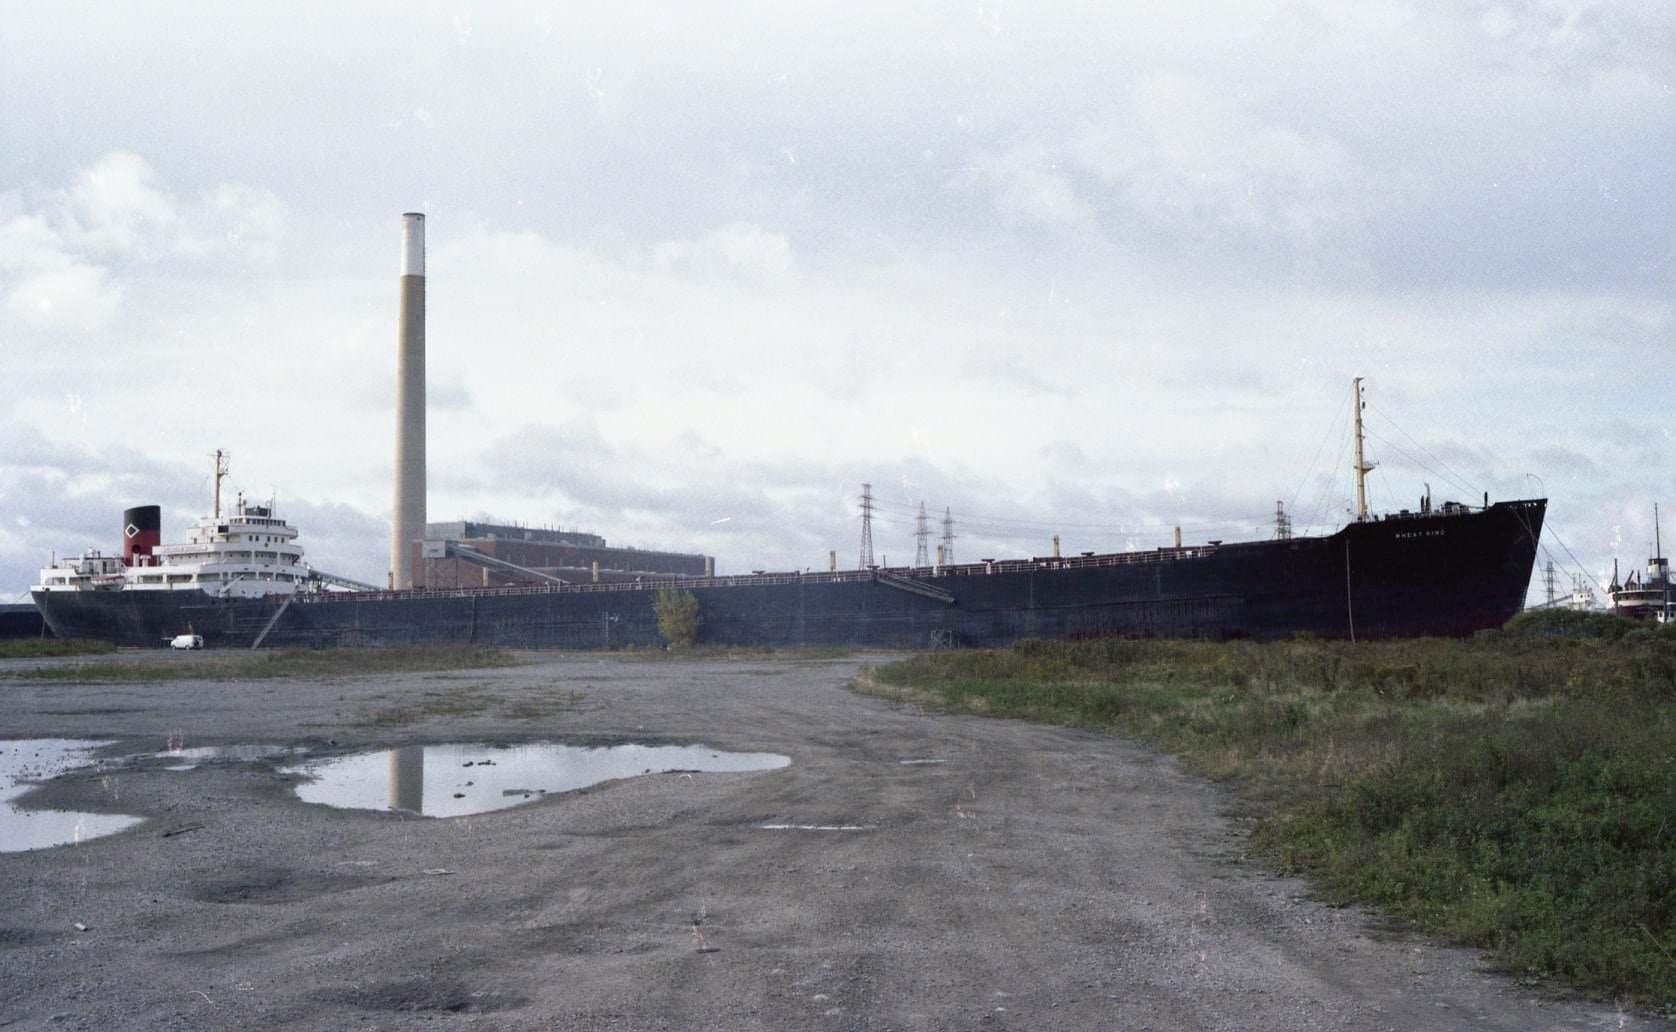 Looking southwest to the 'Wheat King' moored in the portlands; the Hearn generating station in the distance, 1981.